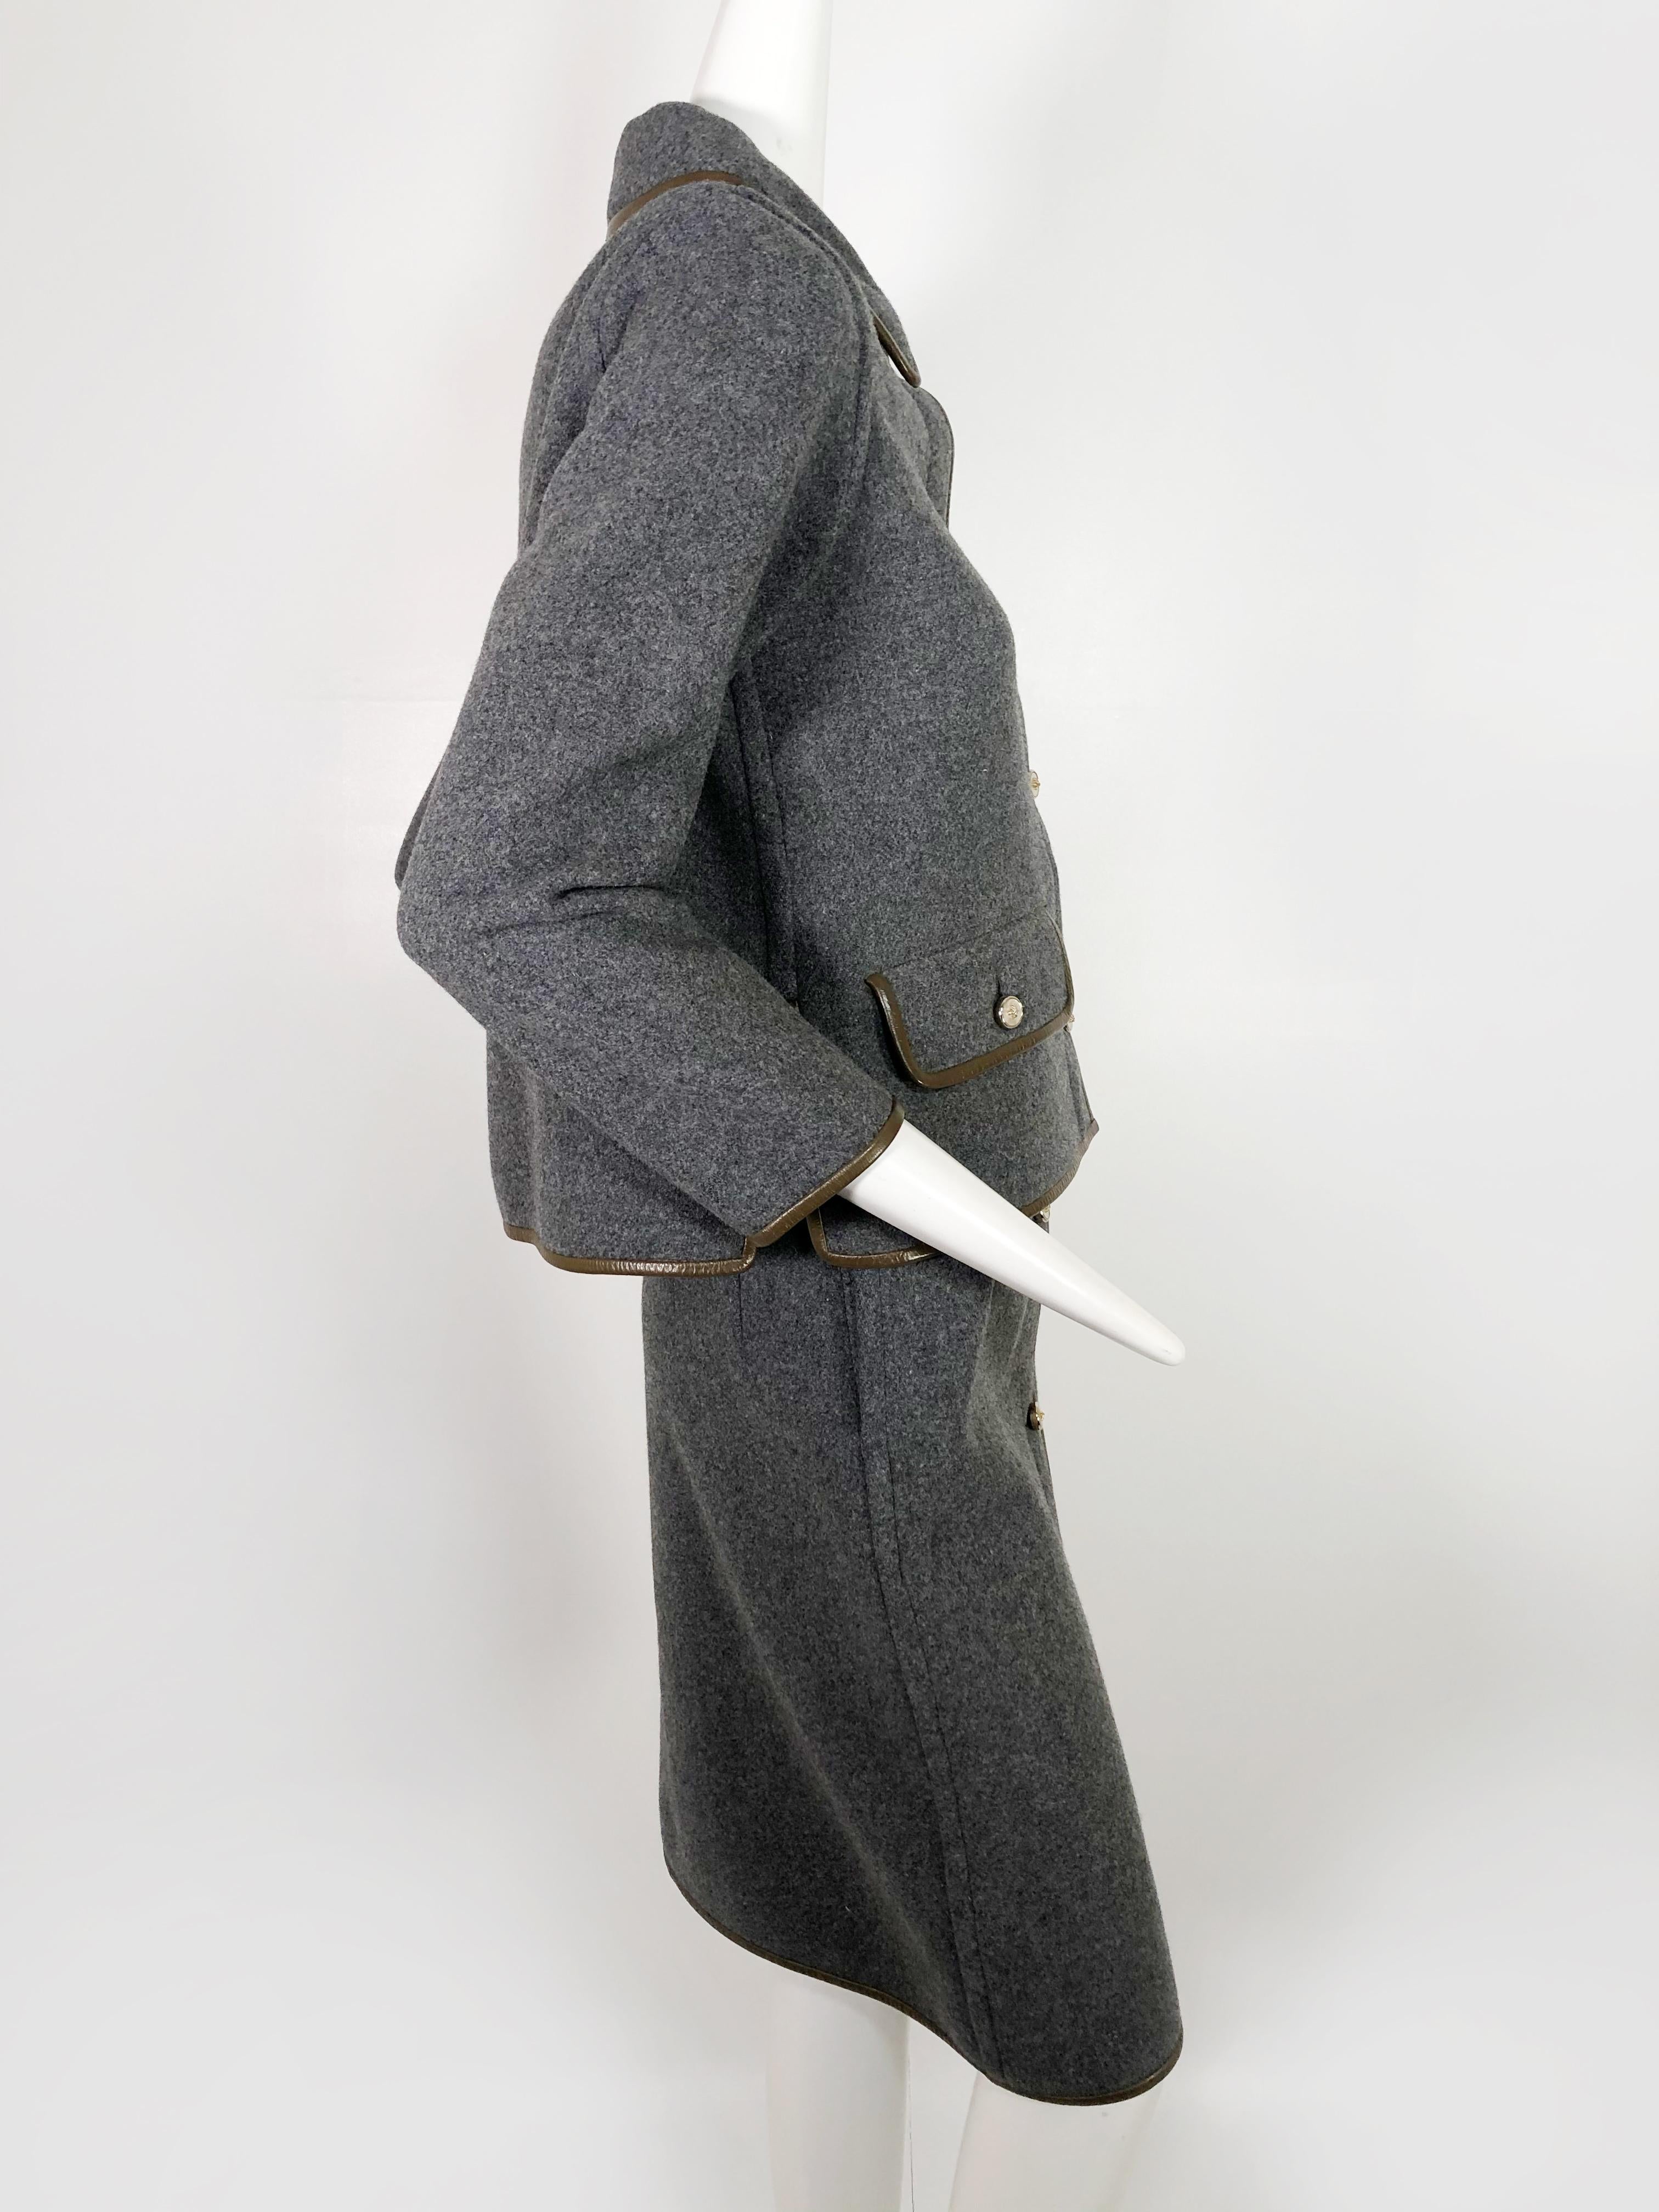 1960s Sills By Bonnie Cashin Mod Gray Wool Skirt Suit W/ Brown Leather Trim In Excellent Condition For Sale In Gresham, OR